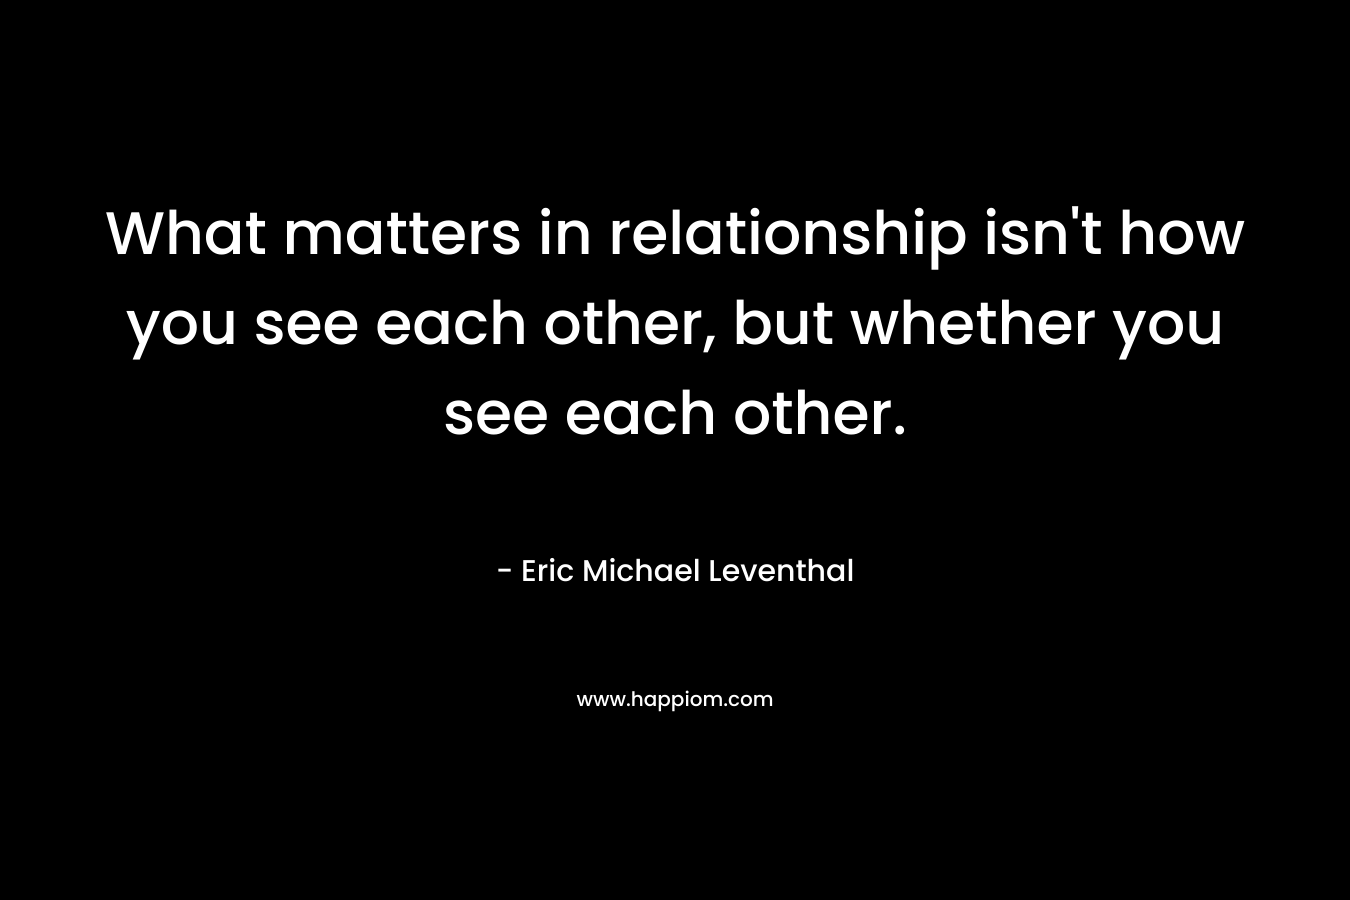 What matters in relationship isn't how you see each other, but whether you see each other.